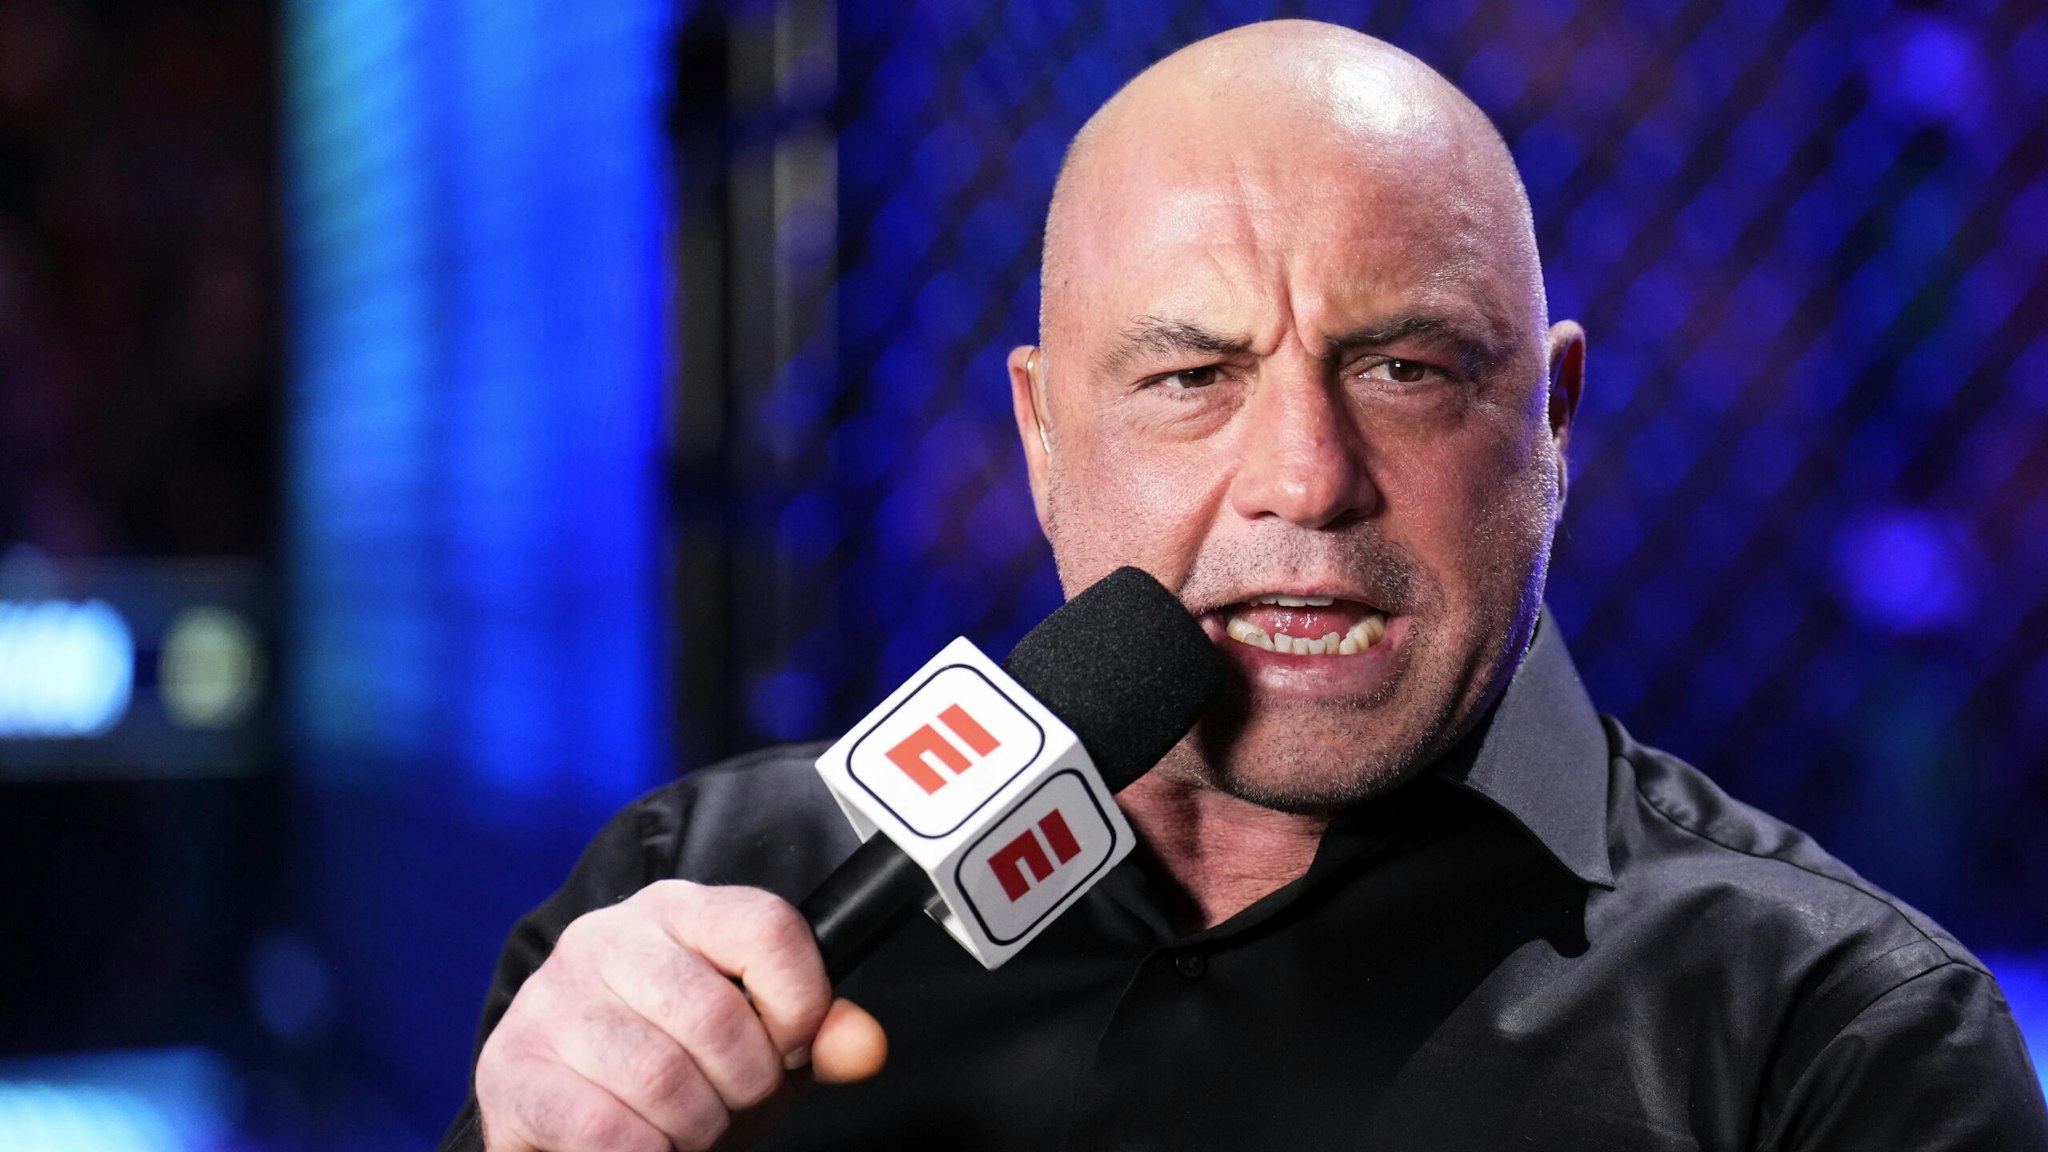 NEW YORK, NEW YORK - NOVEMBER 12: Joe Rogan anchors the broadcast during the UFC 281 event at Madison Square Garden on November 12, 2022 in New York City.